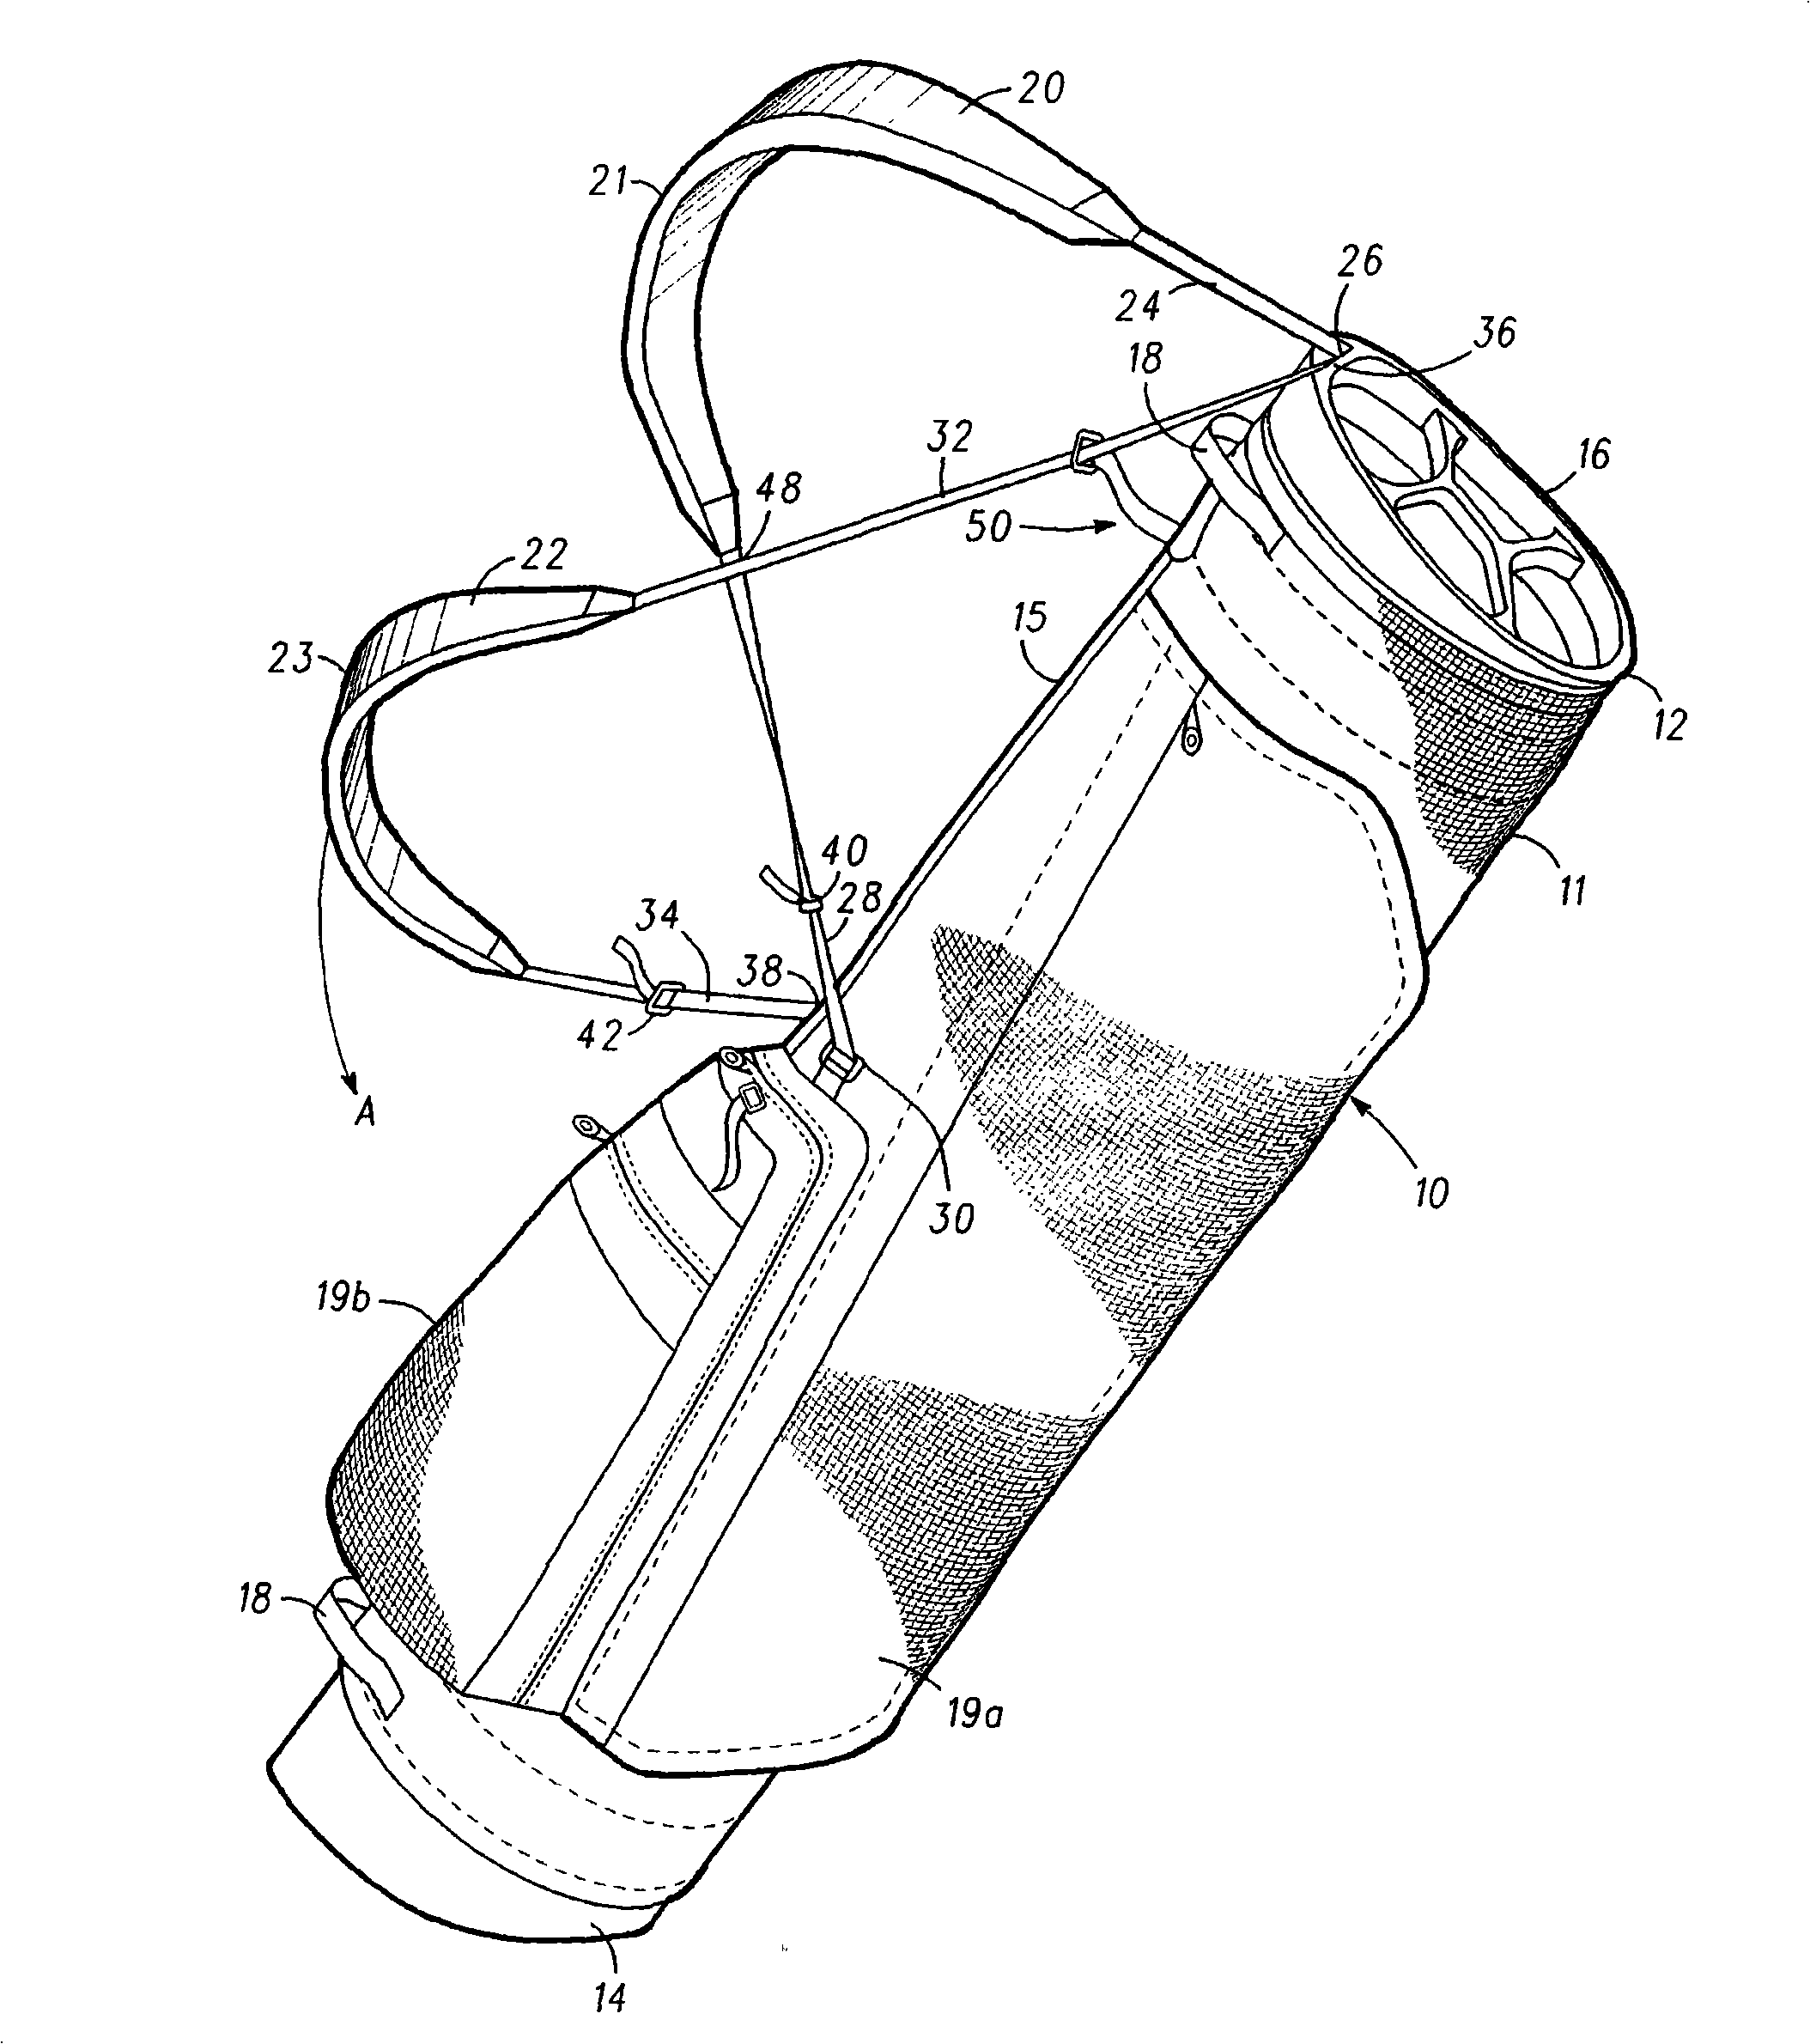 Golf bag with strap guide assembly